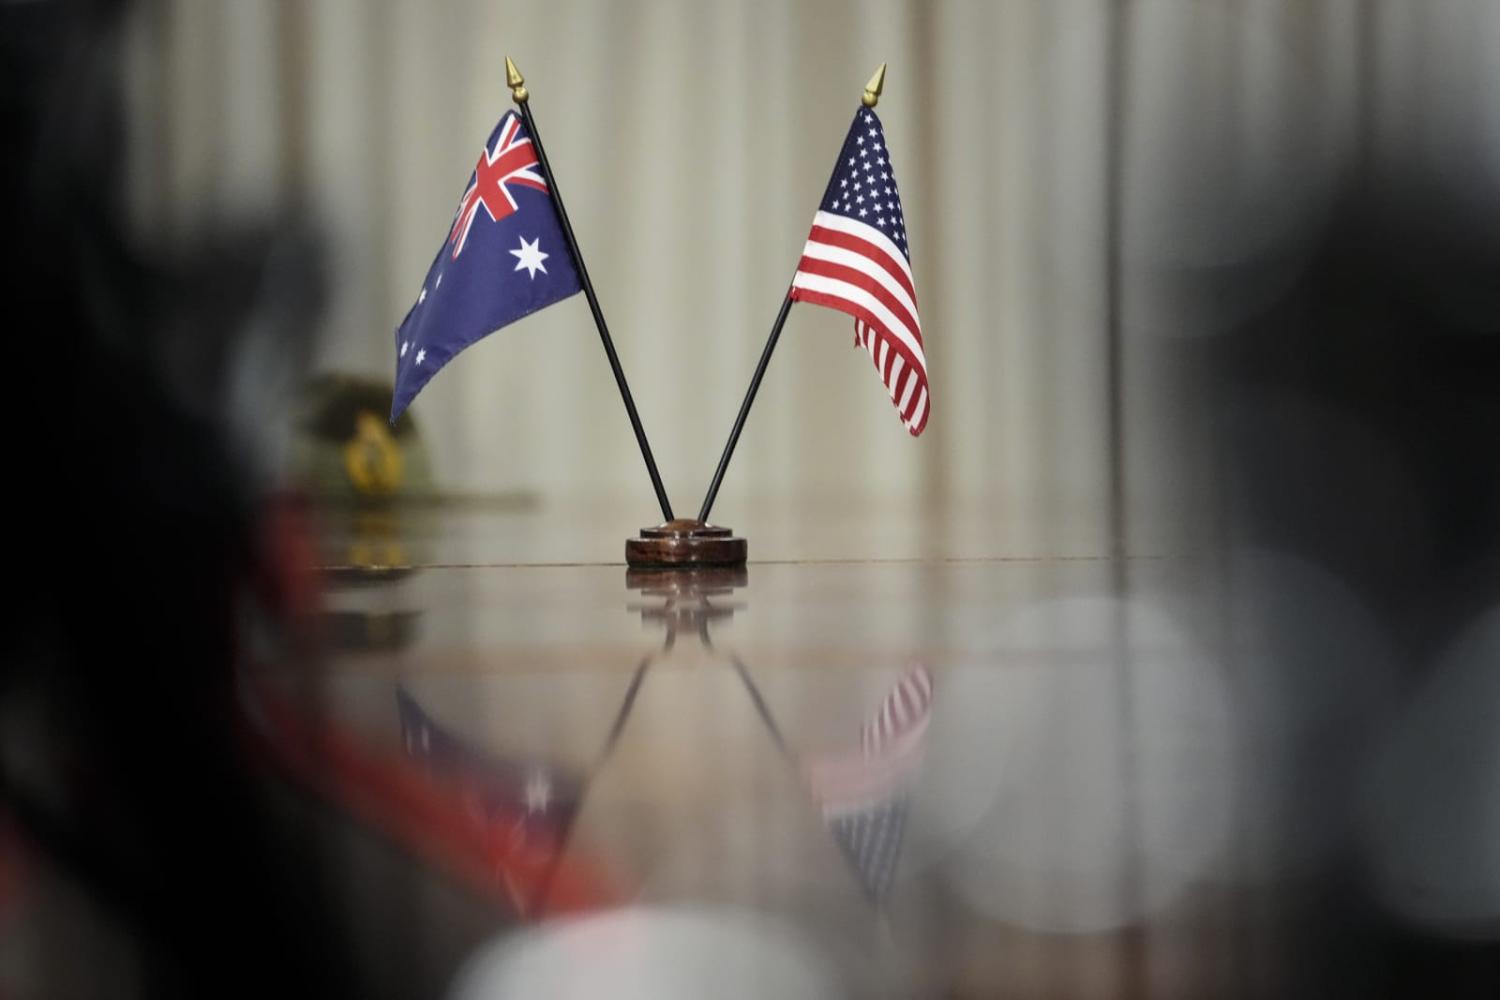 Australians want broader cooperation between Australia and the United States (Drew Angerer/Getty Images)